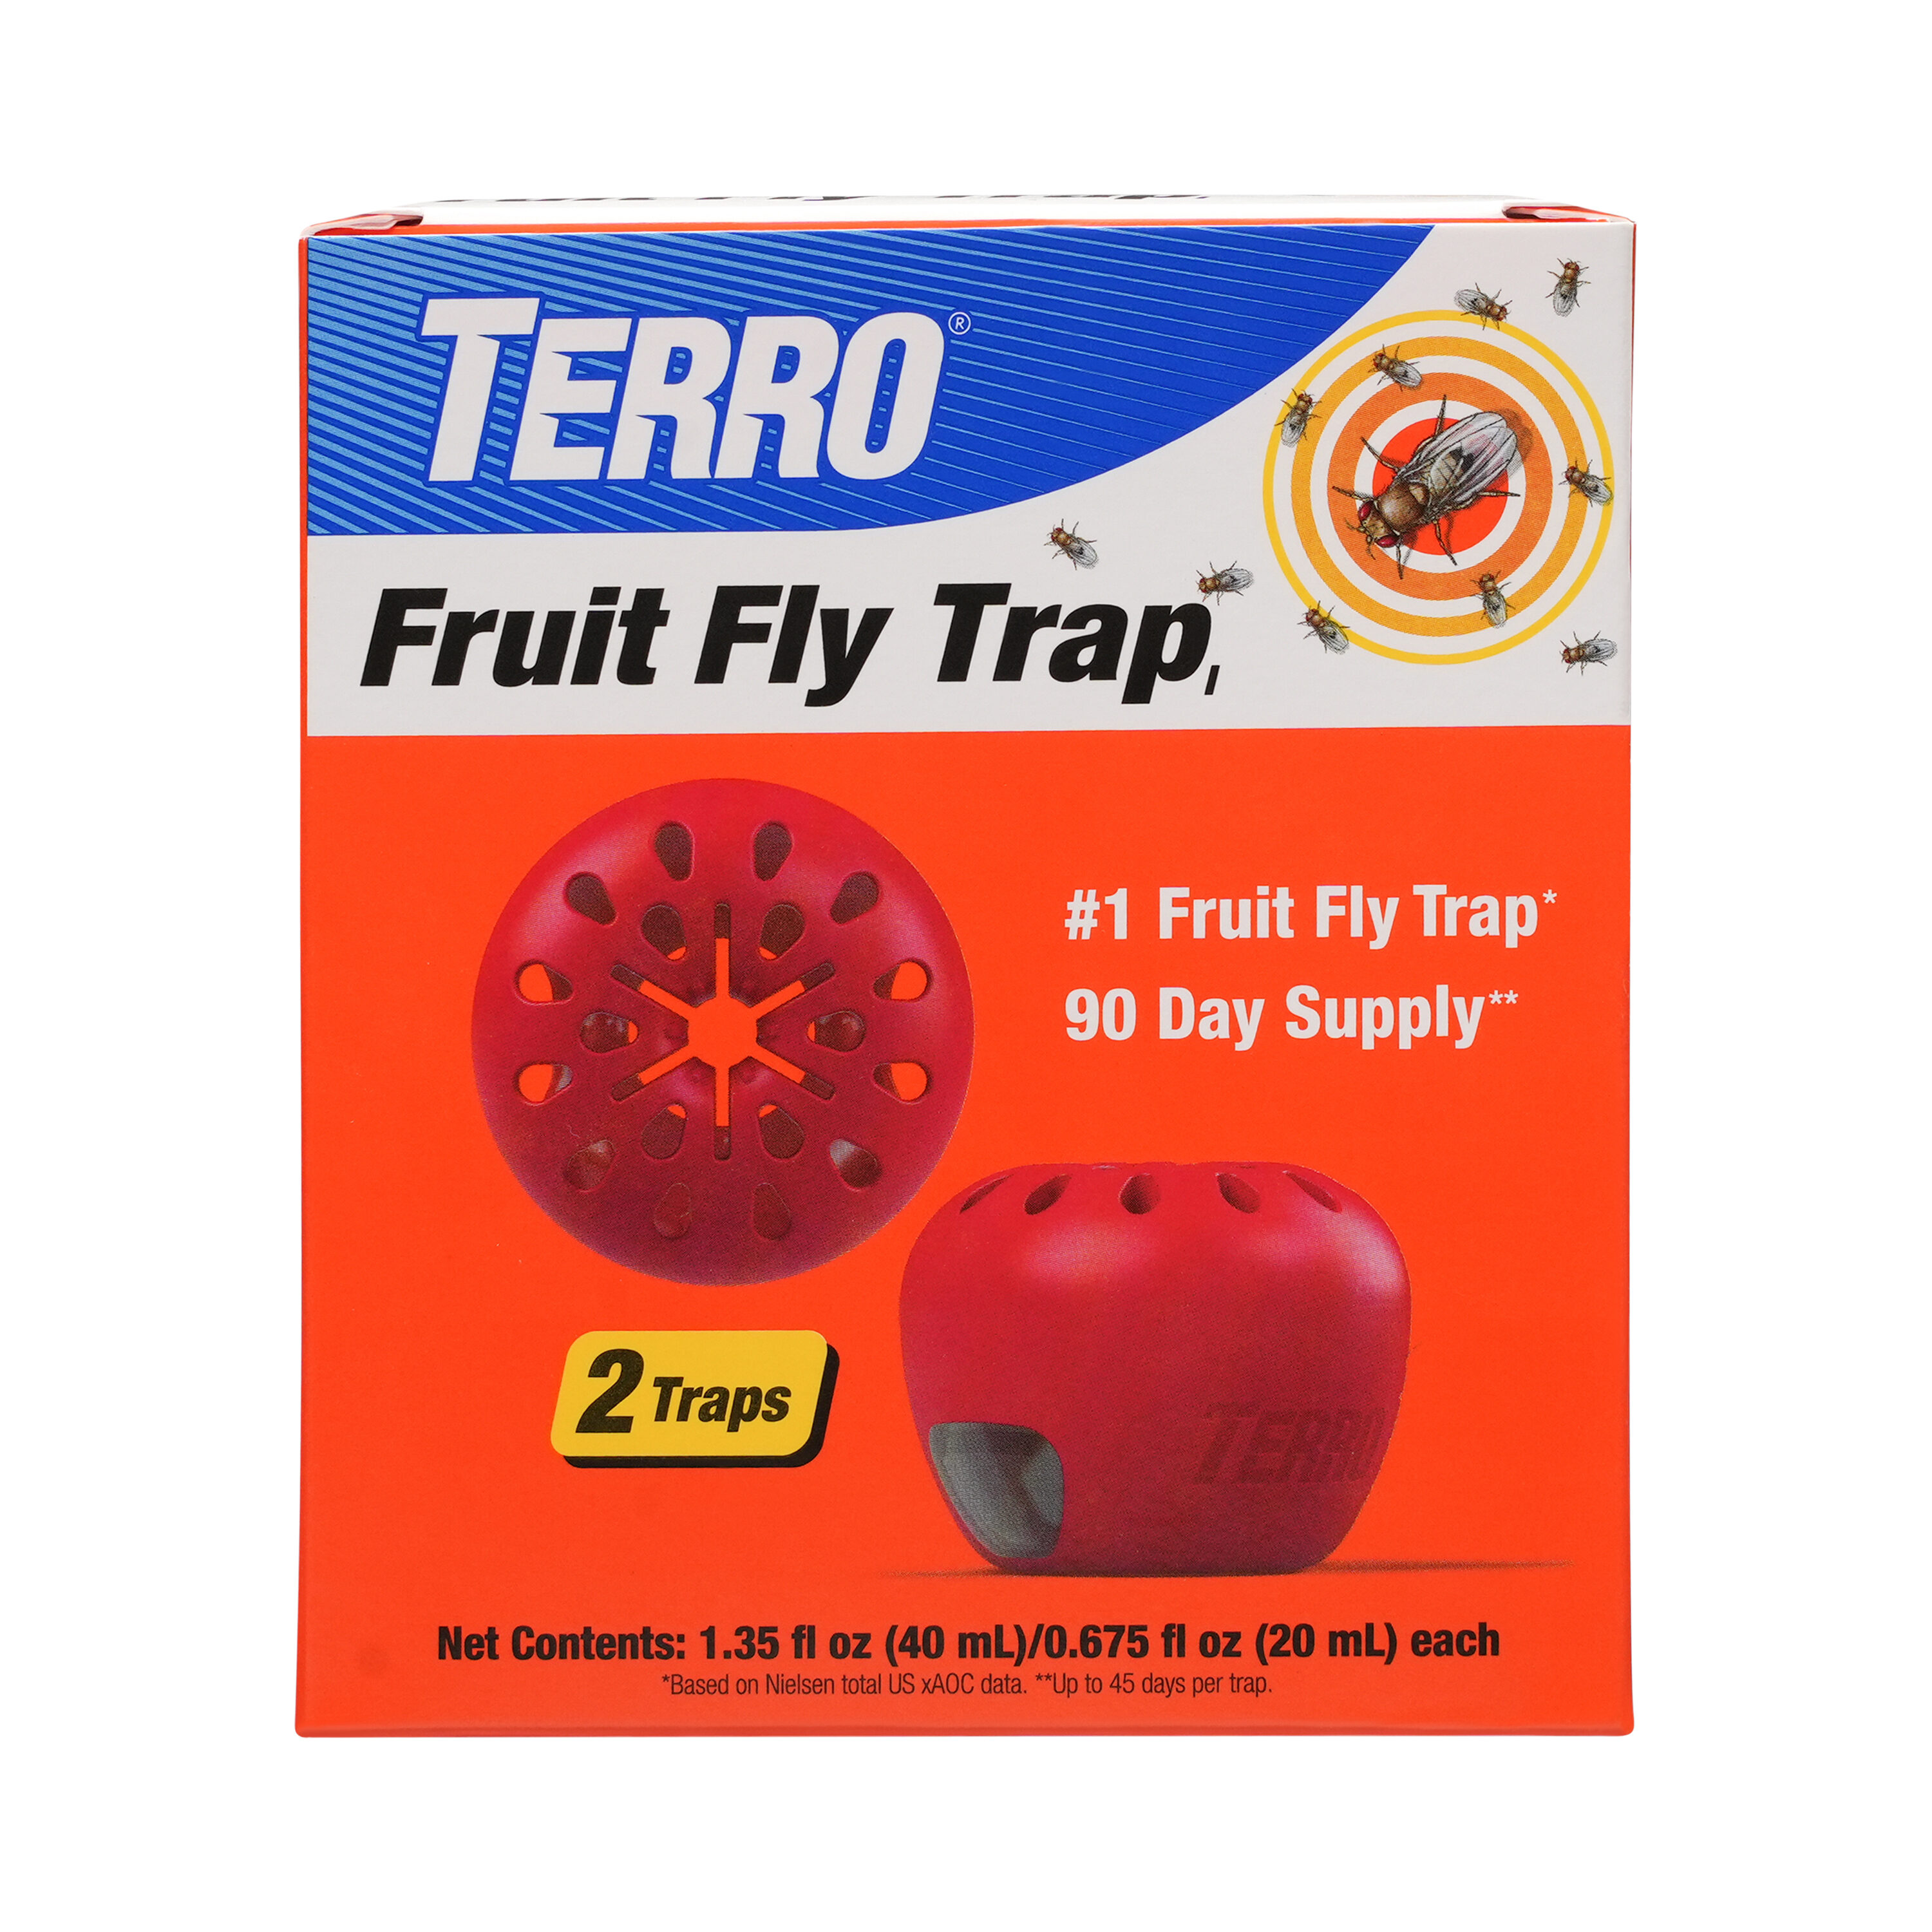 Rescue! Fruit Fly Trap Attractant Refill 30 Day Supply 10 Pack